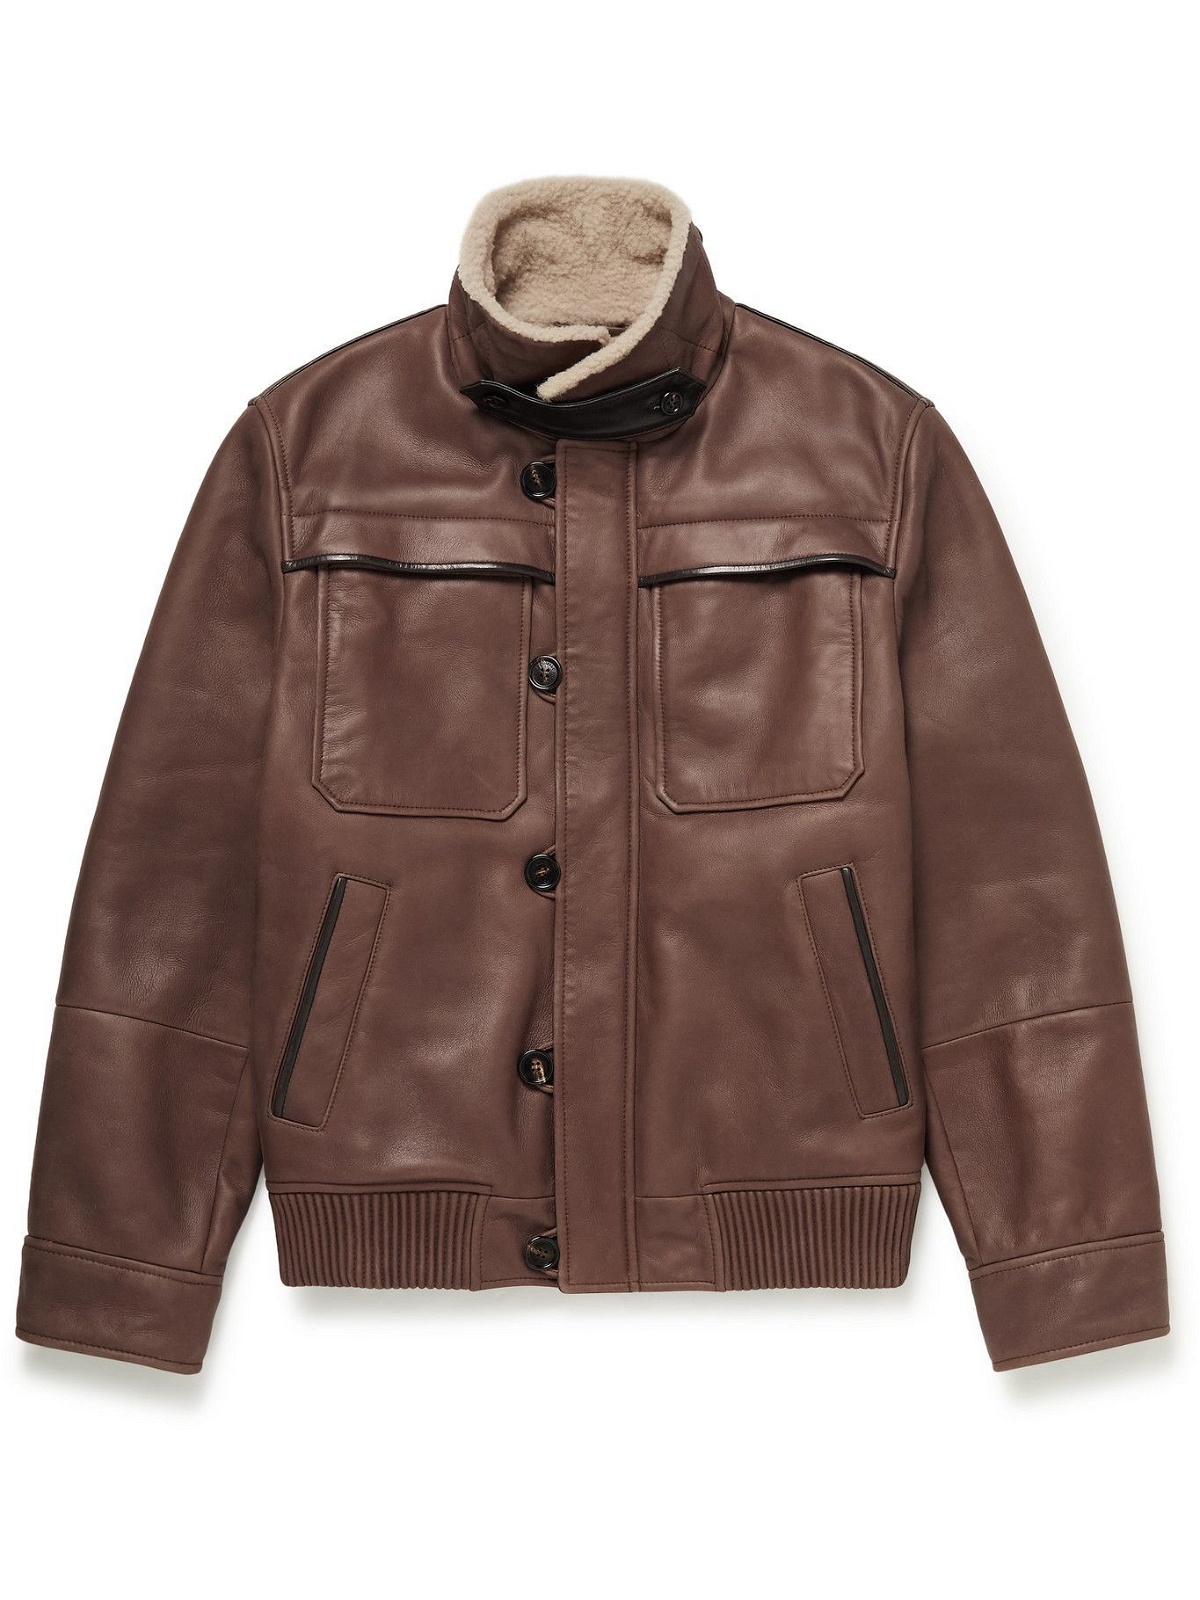 Photo: BRUNELLO CUCINELLI - Shearling-Lined Leather Jacket - Brown